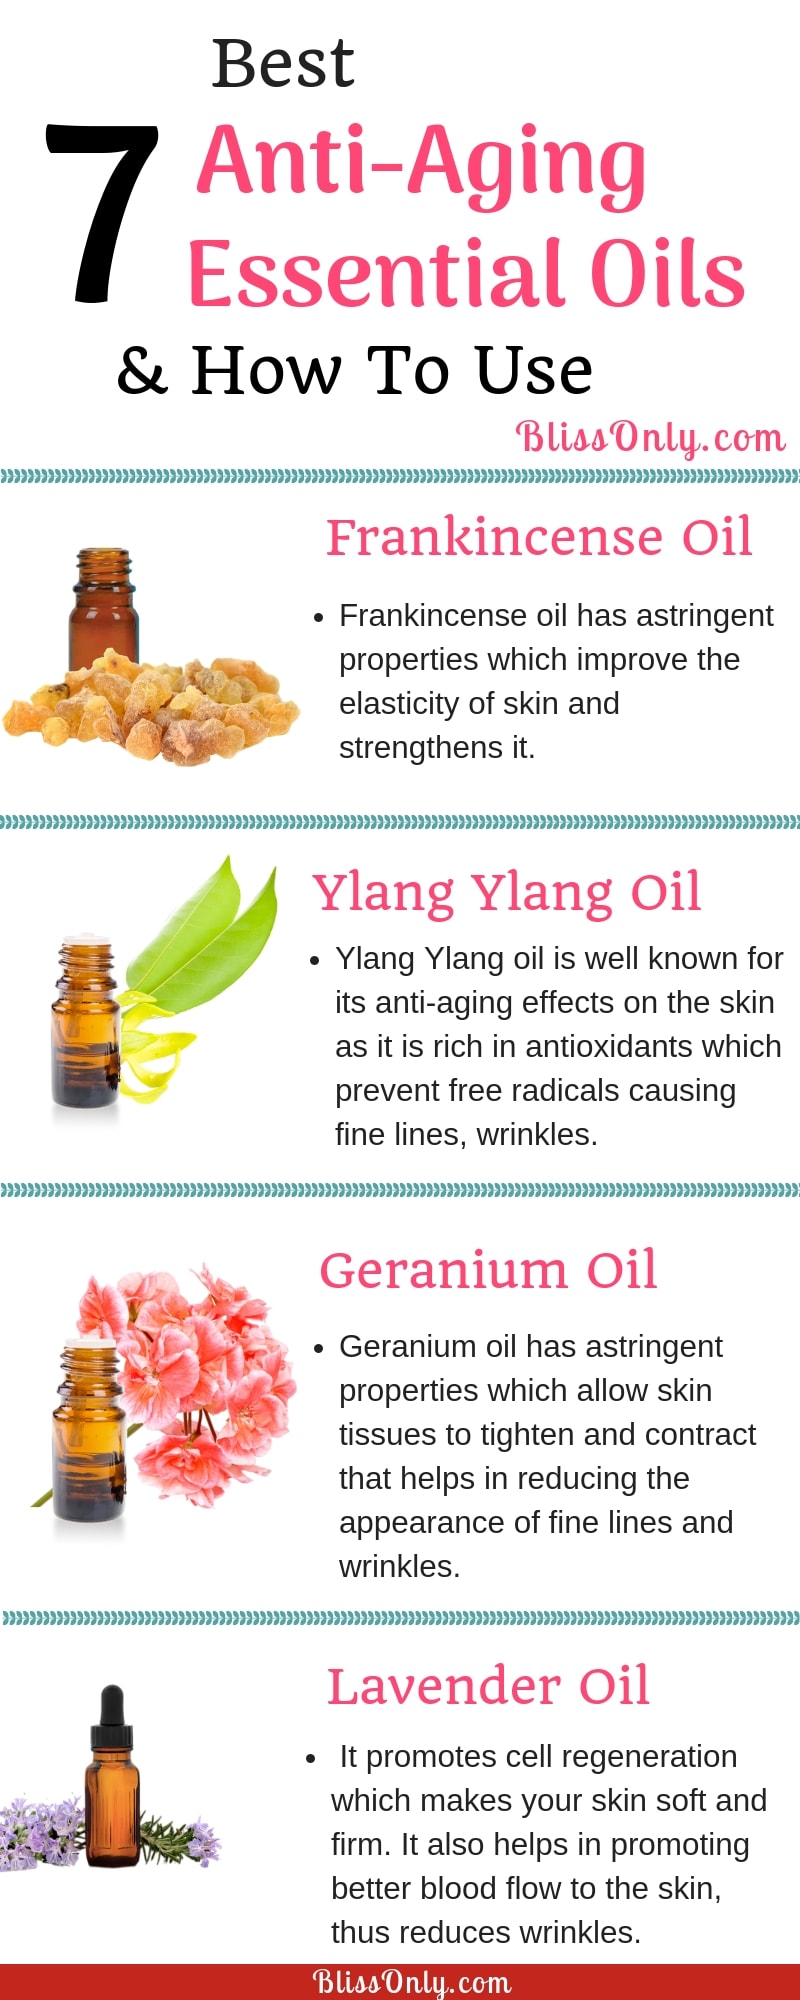 7 Best Anti-Aging Essential Oils And How To Use - BlissOnly